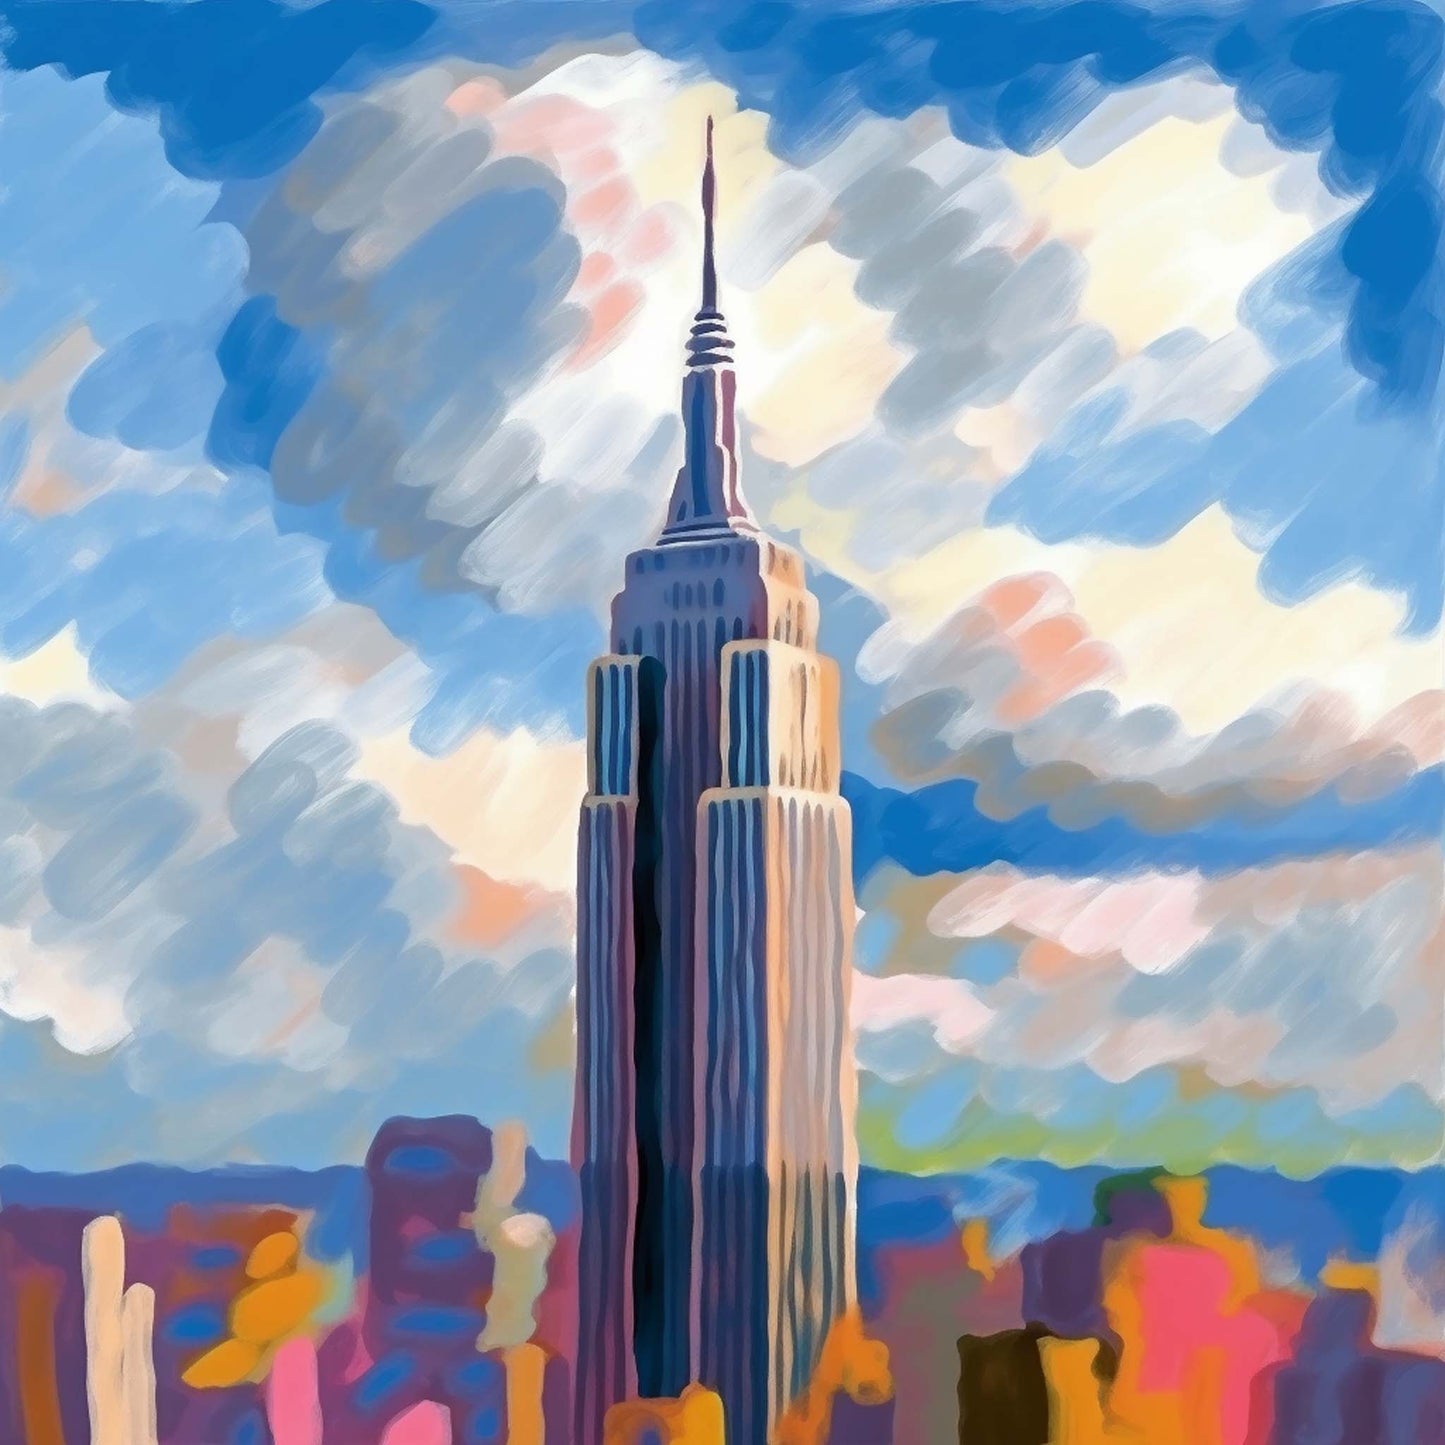 New York Empire State Building - mural in the style of impressionism